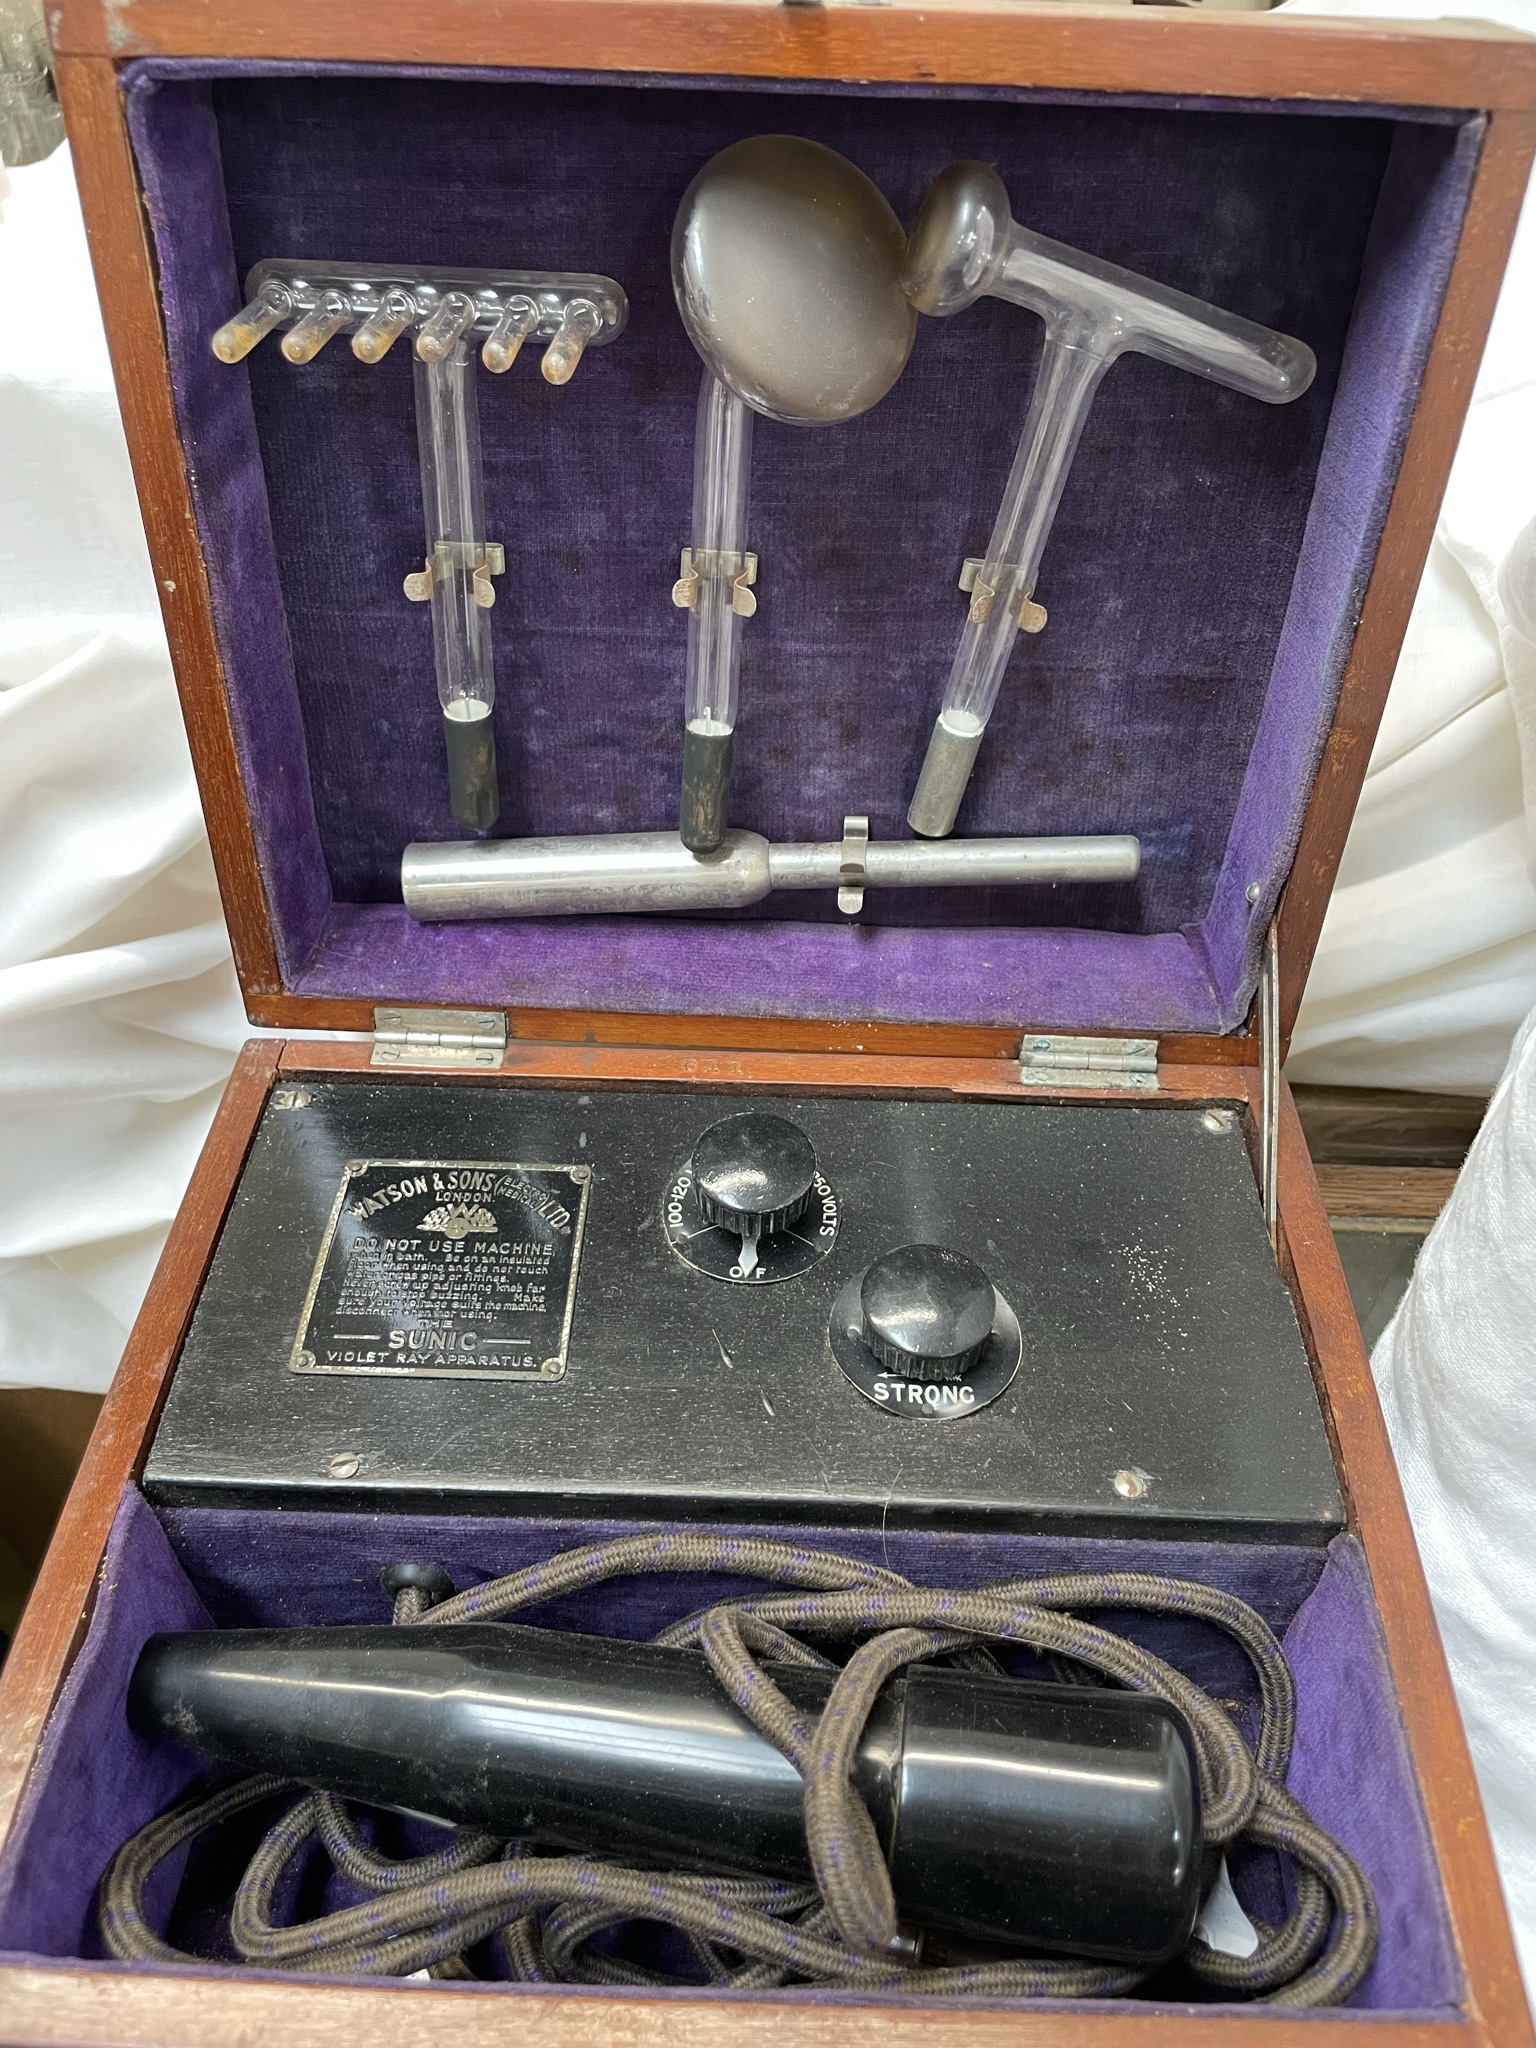 A Watson and Son Sunic violet ray apparatus, - Image 3 of 3